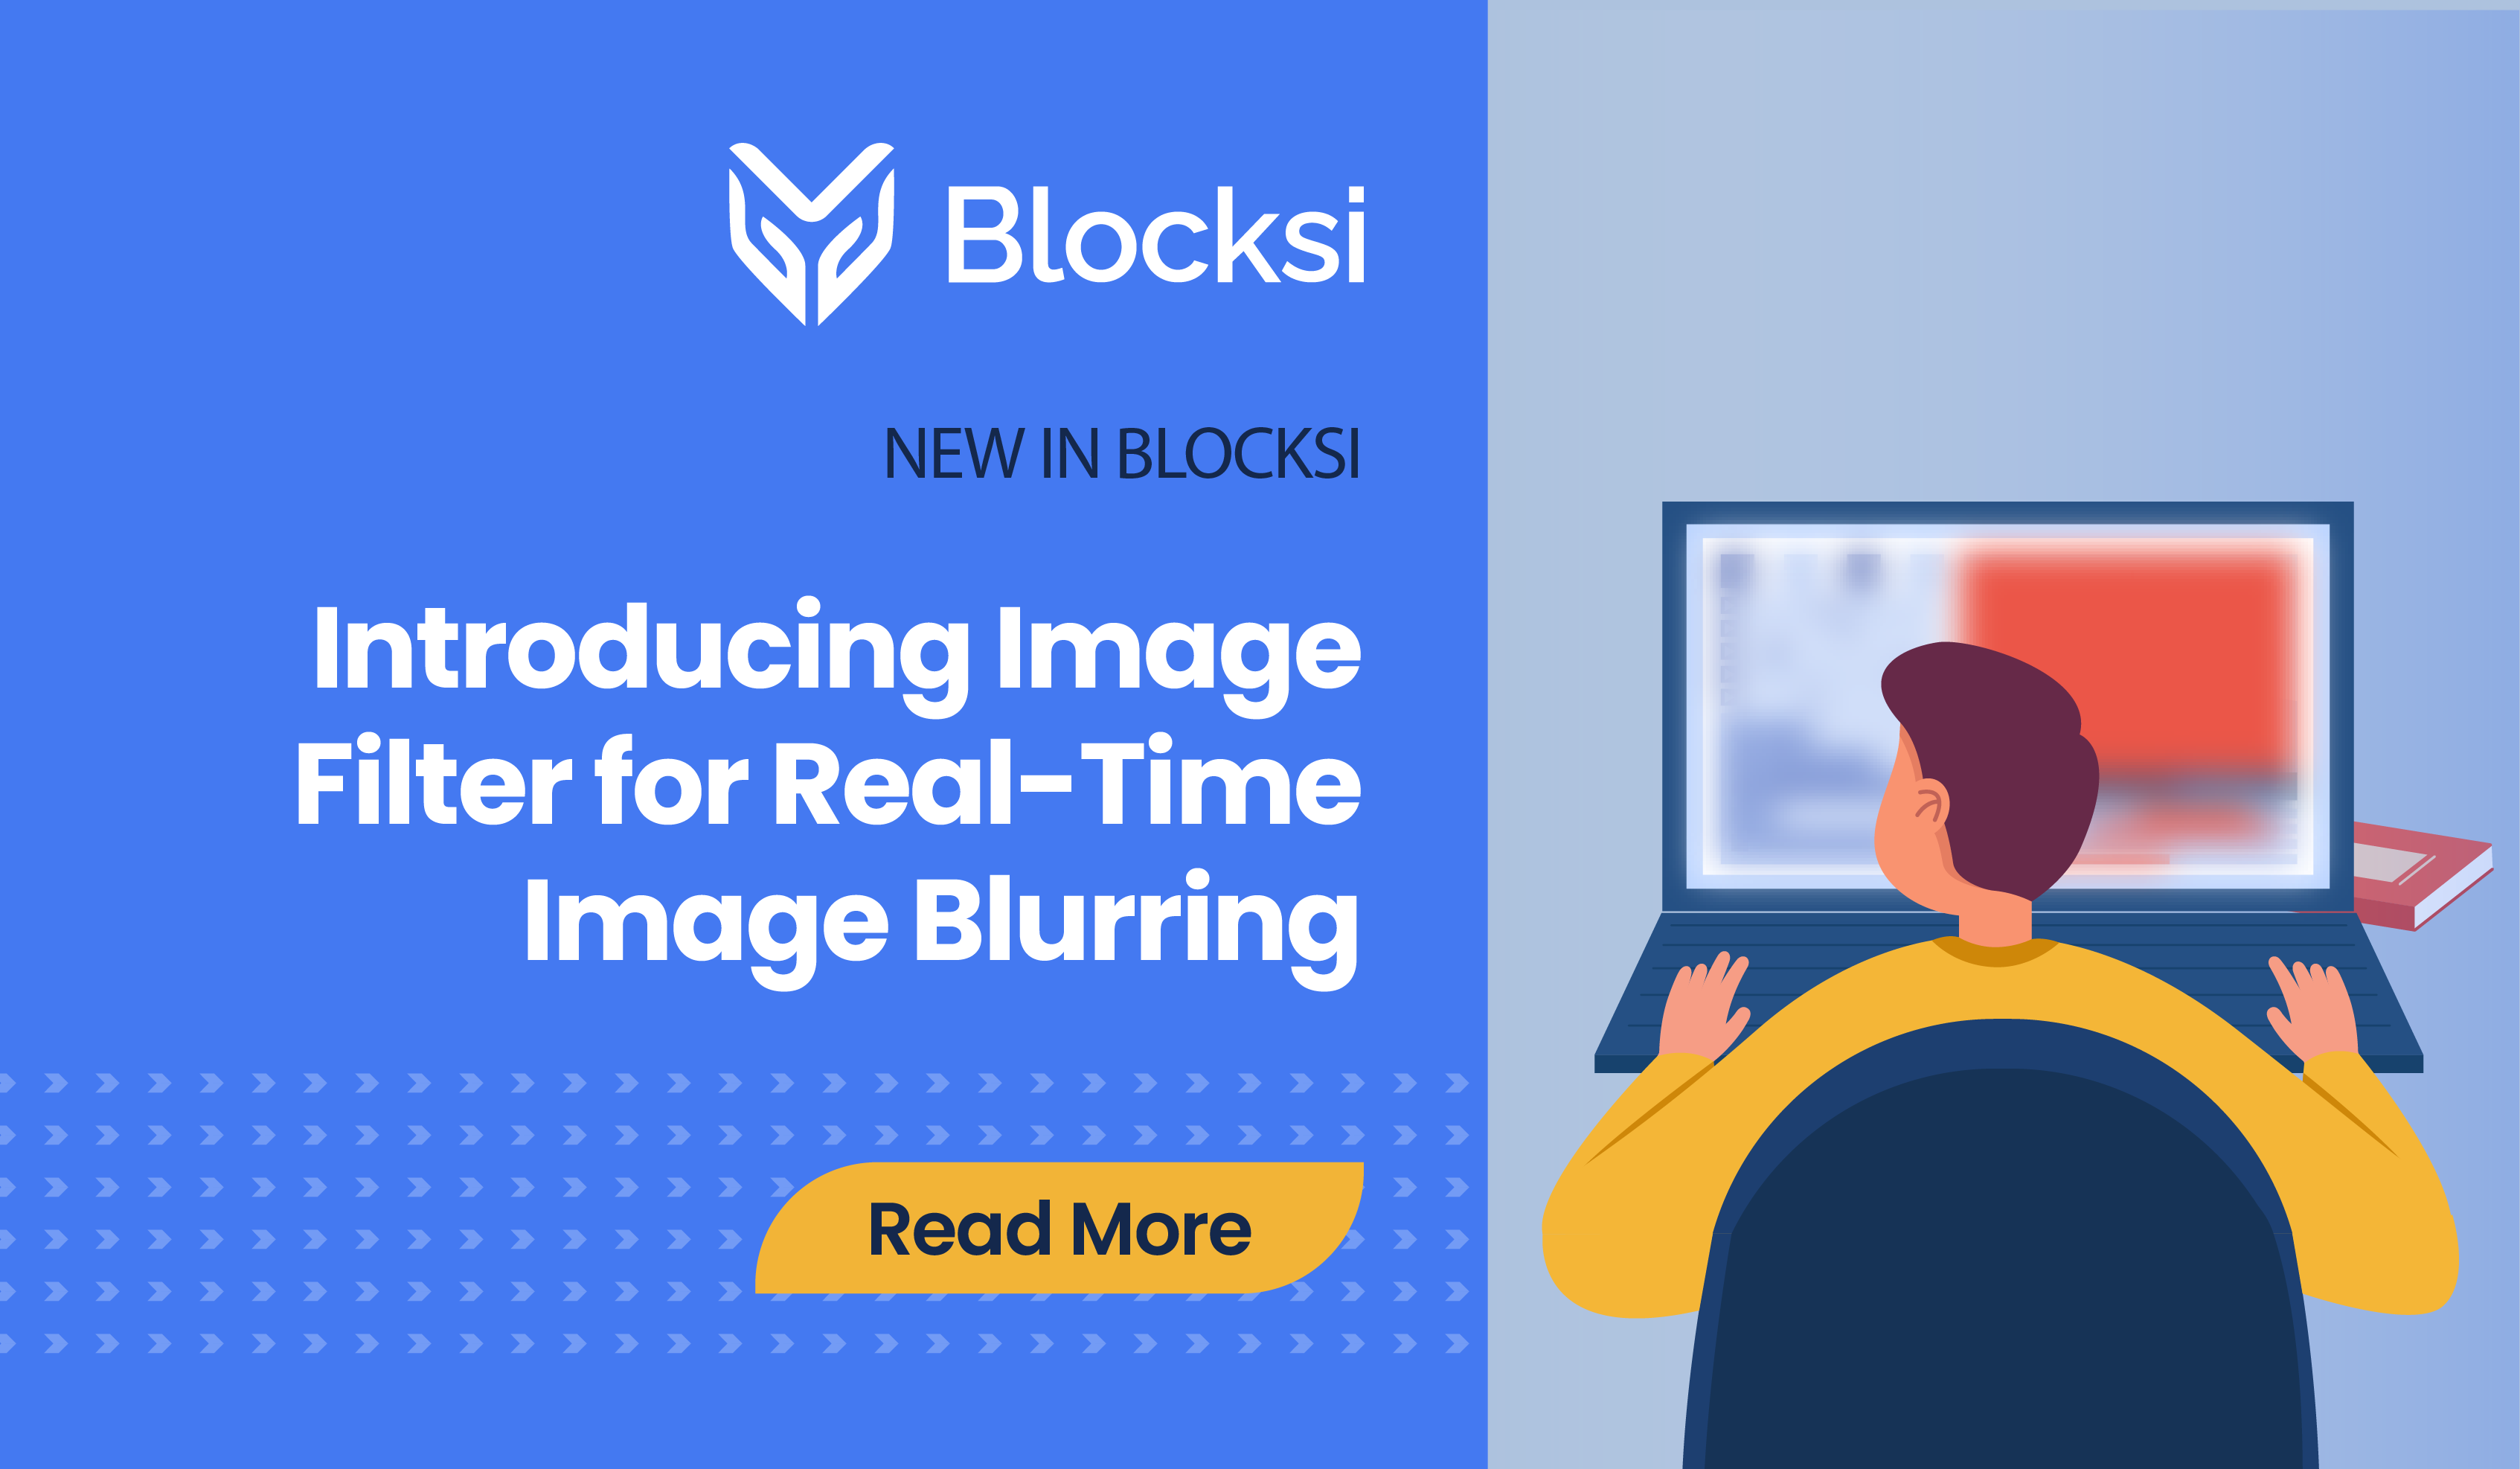 AI-Powered Image Filter for Real-Time Image Blurring